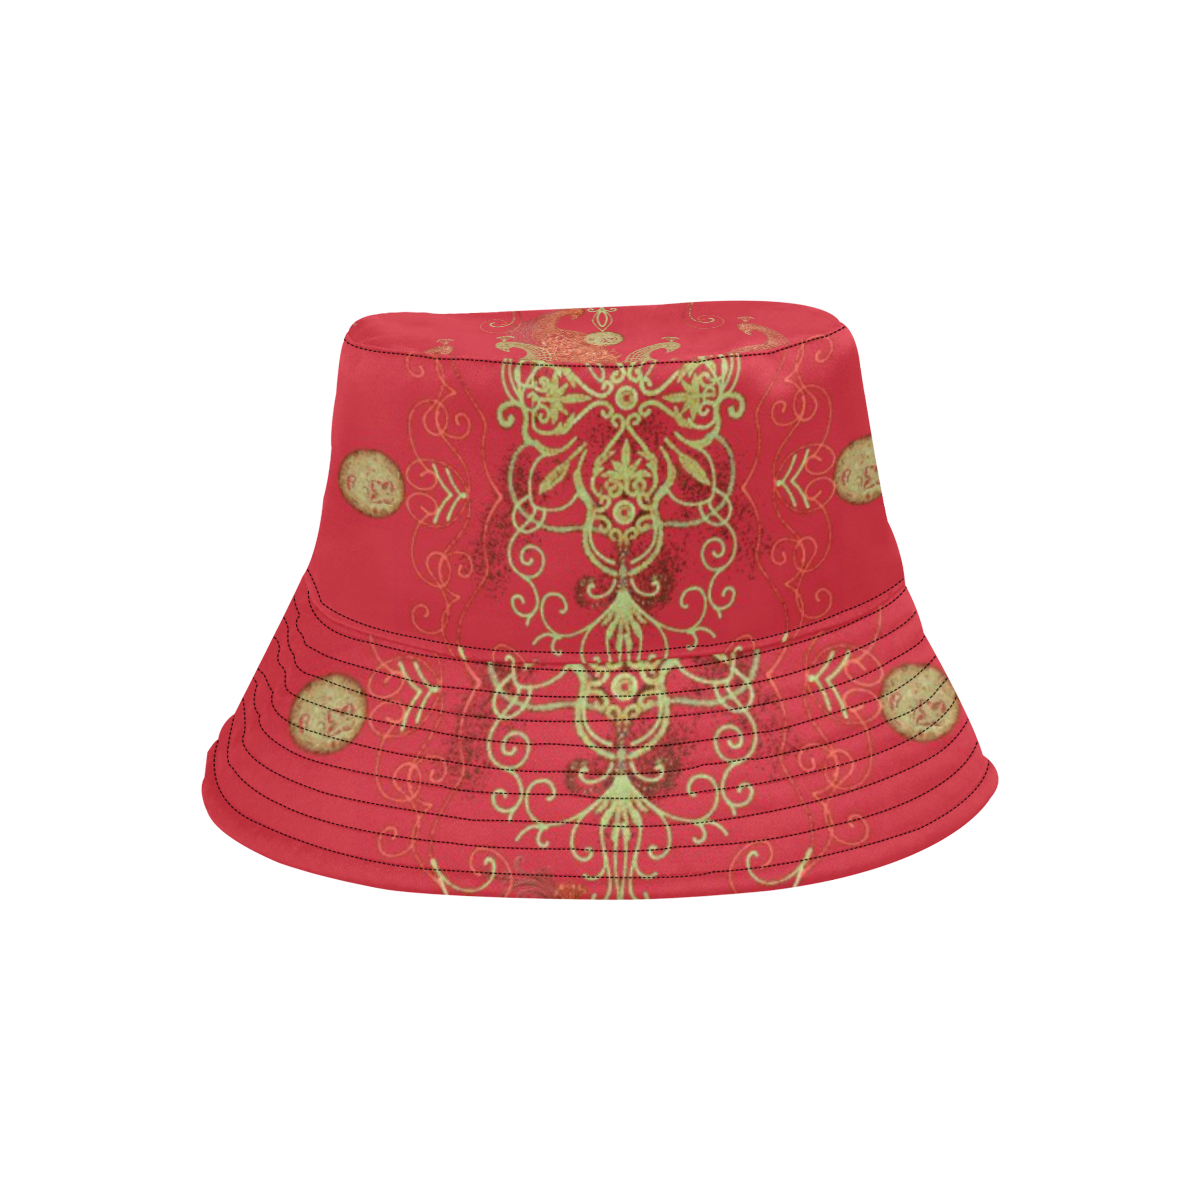 peacocq parade 11 All Over Print Bucket Hat for Men